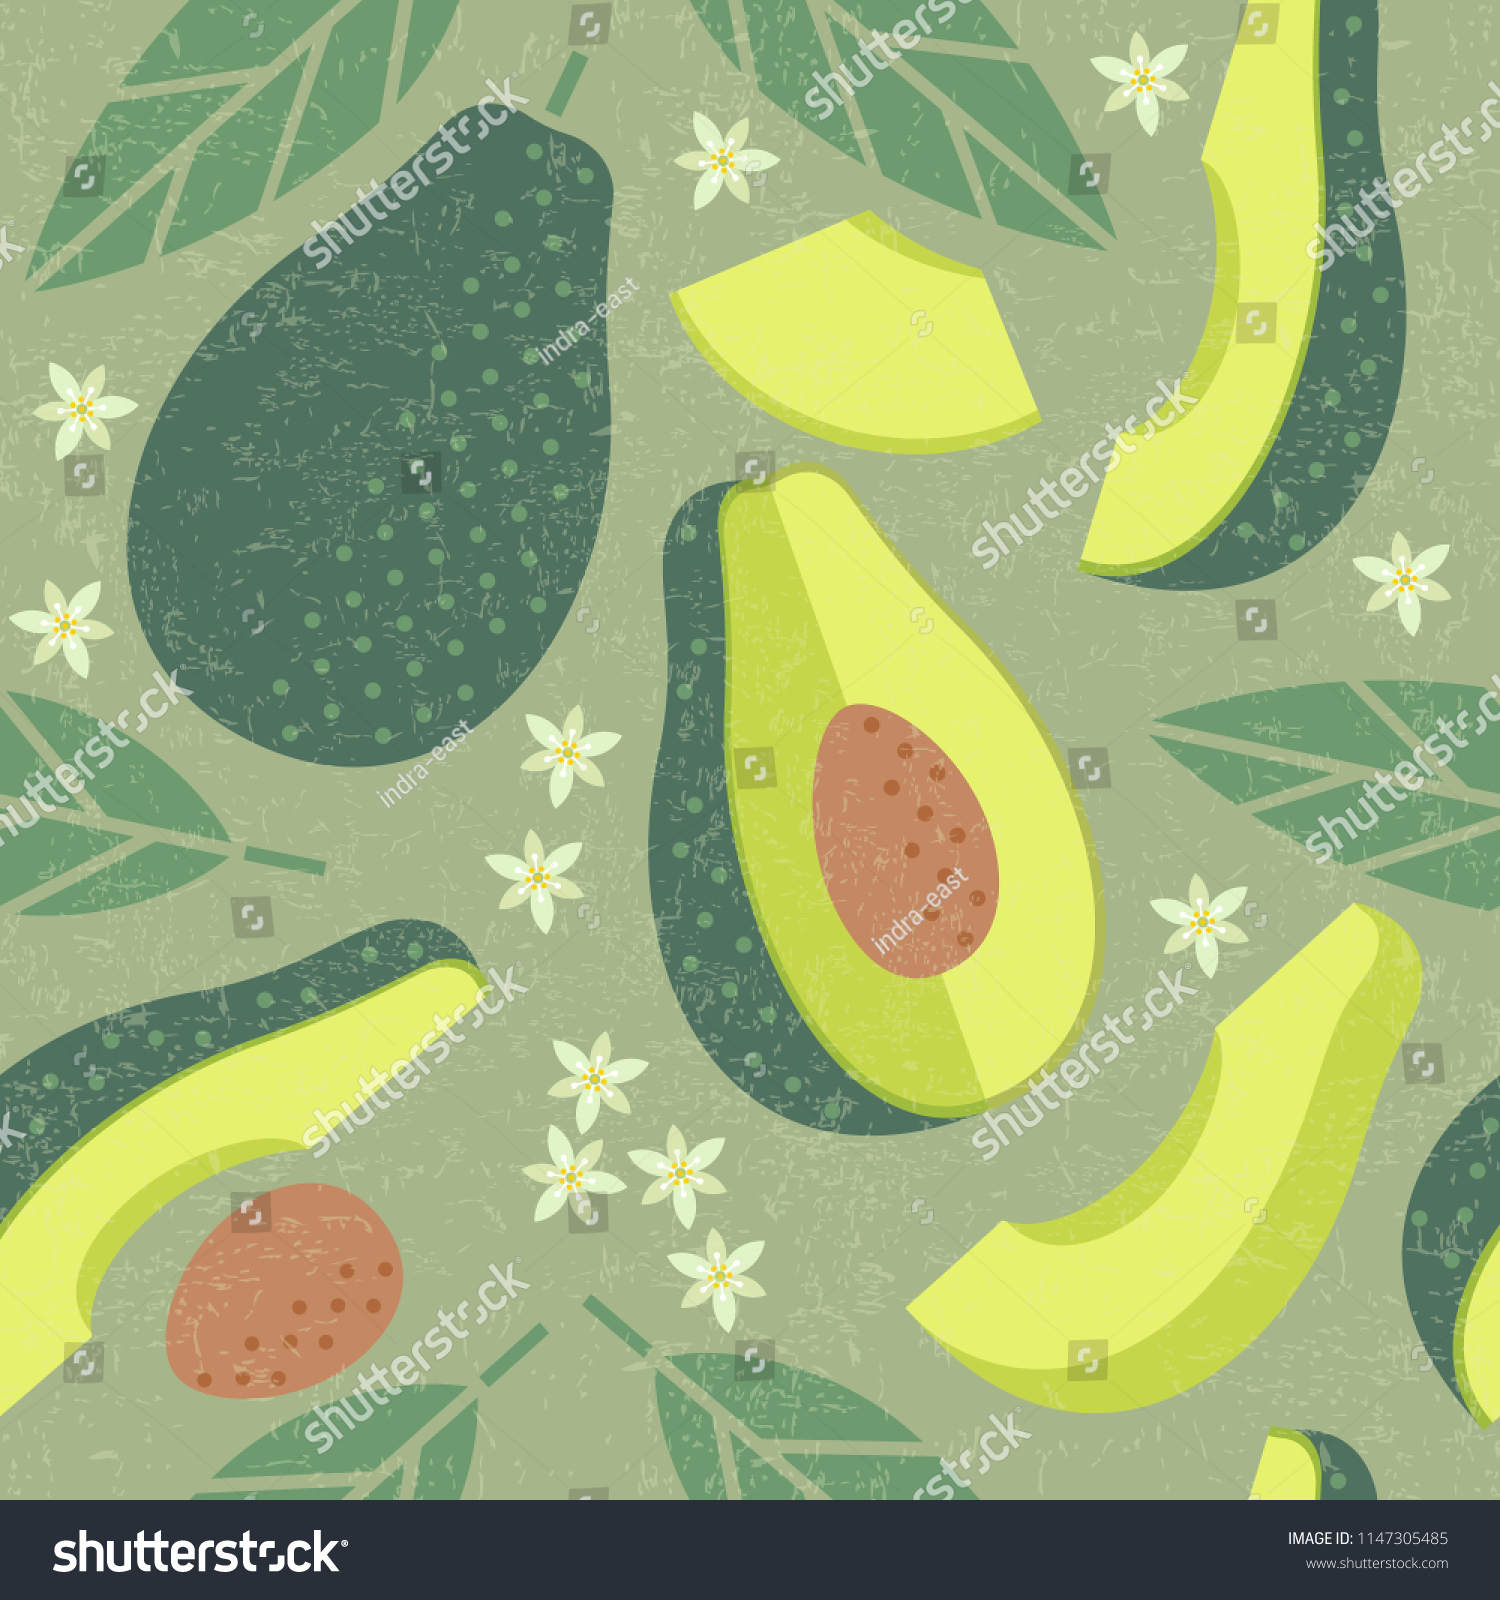 Avocado seamless pattern. Whole and sliced avocado with leaves and flowers on shabby background. Original simple flat illustration. Shabby style. #1147305485